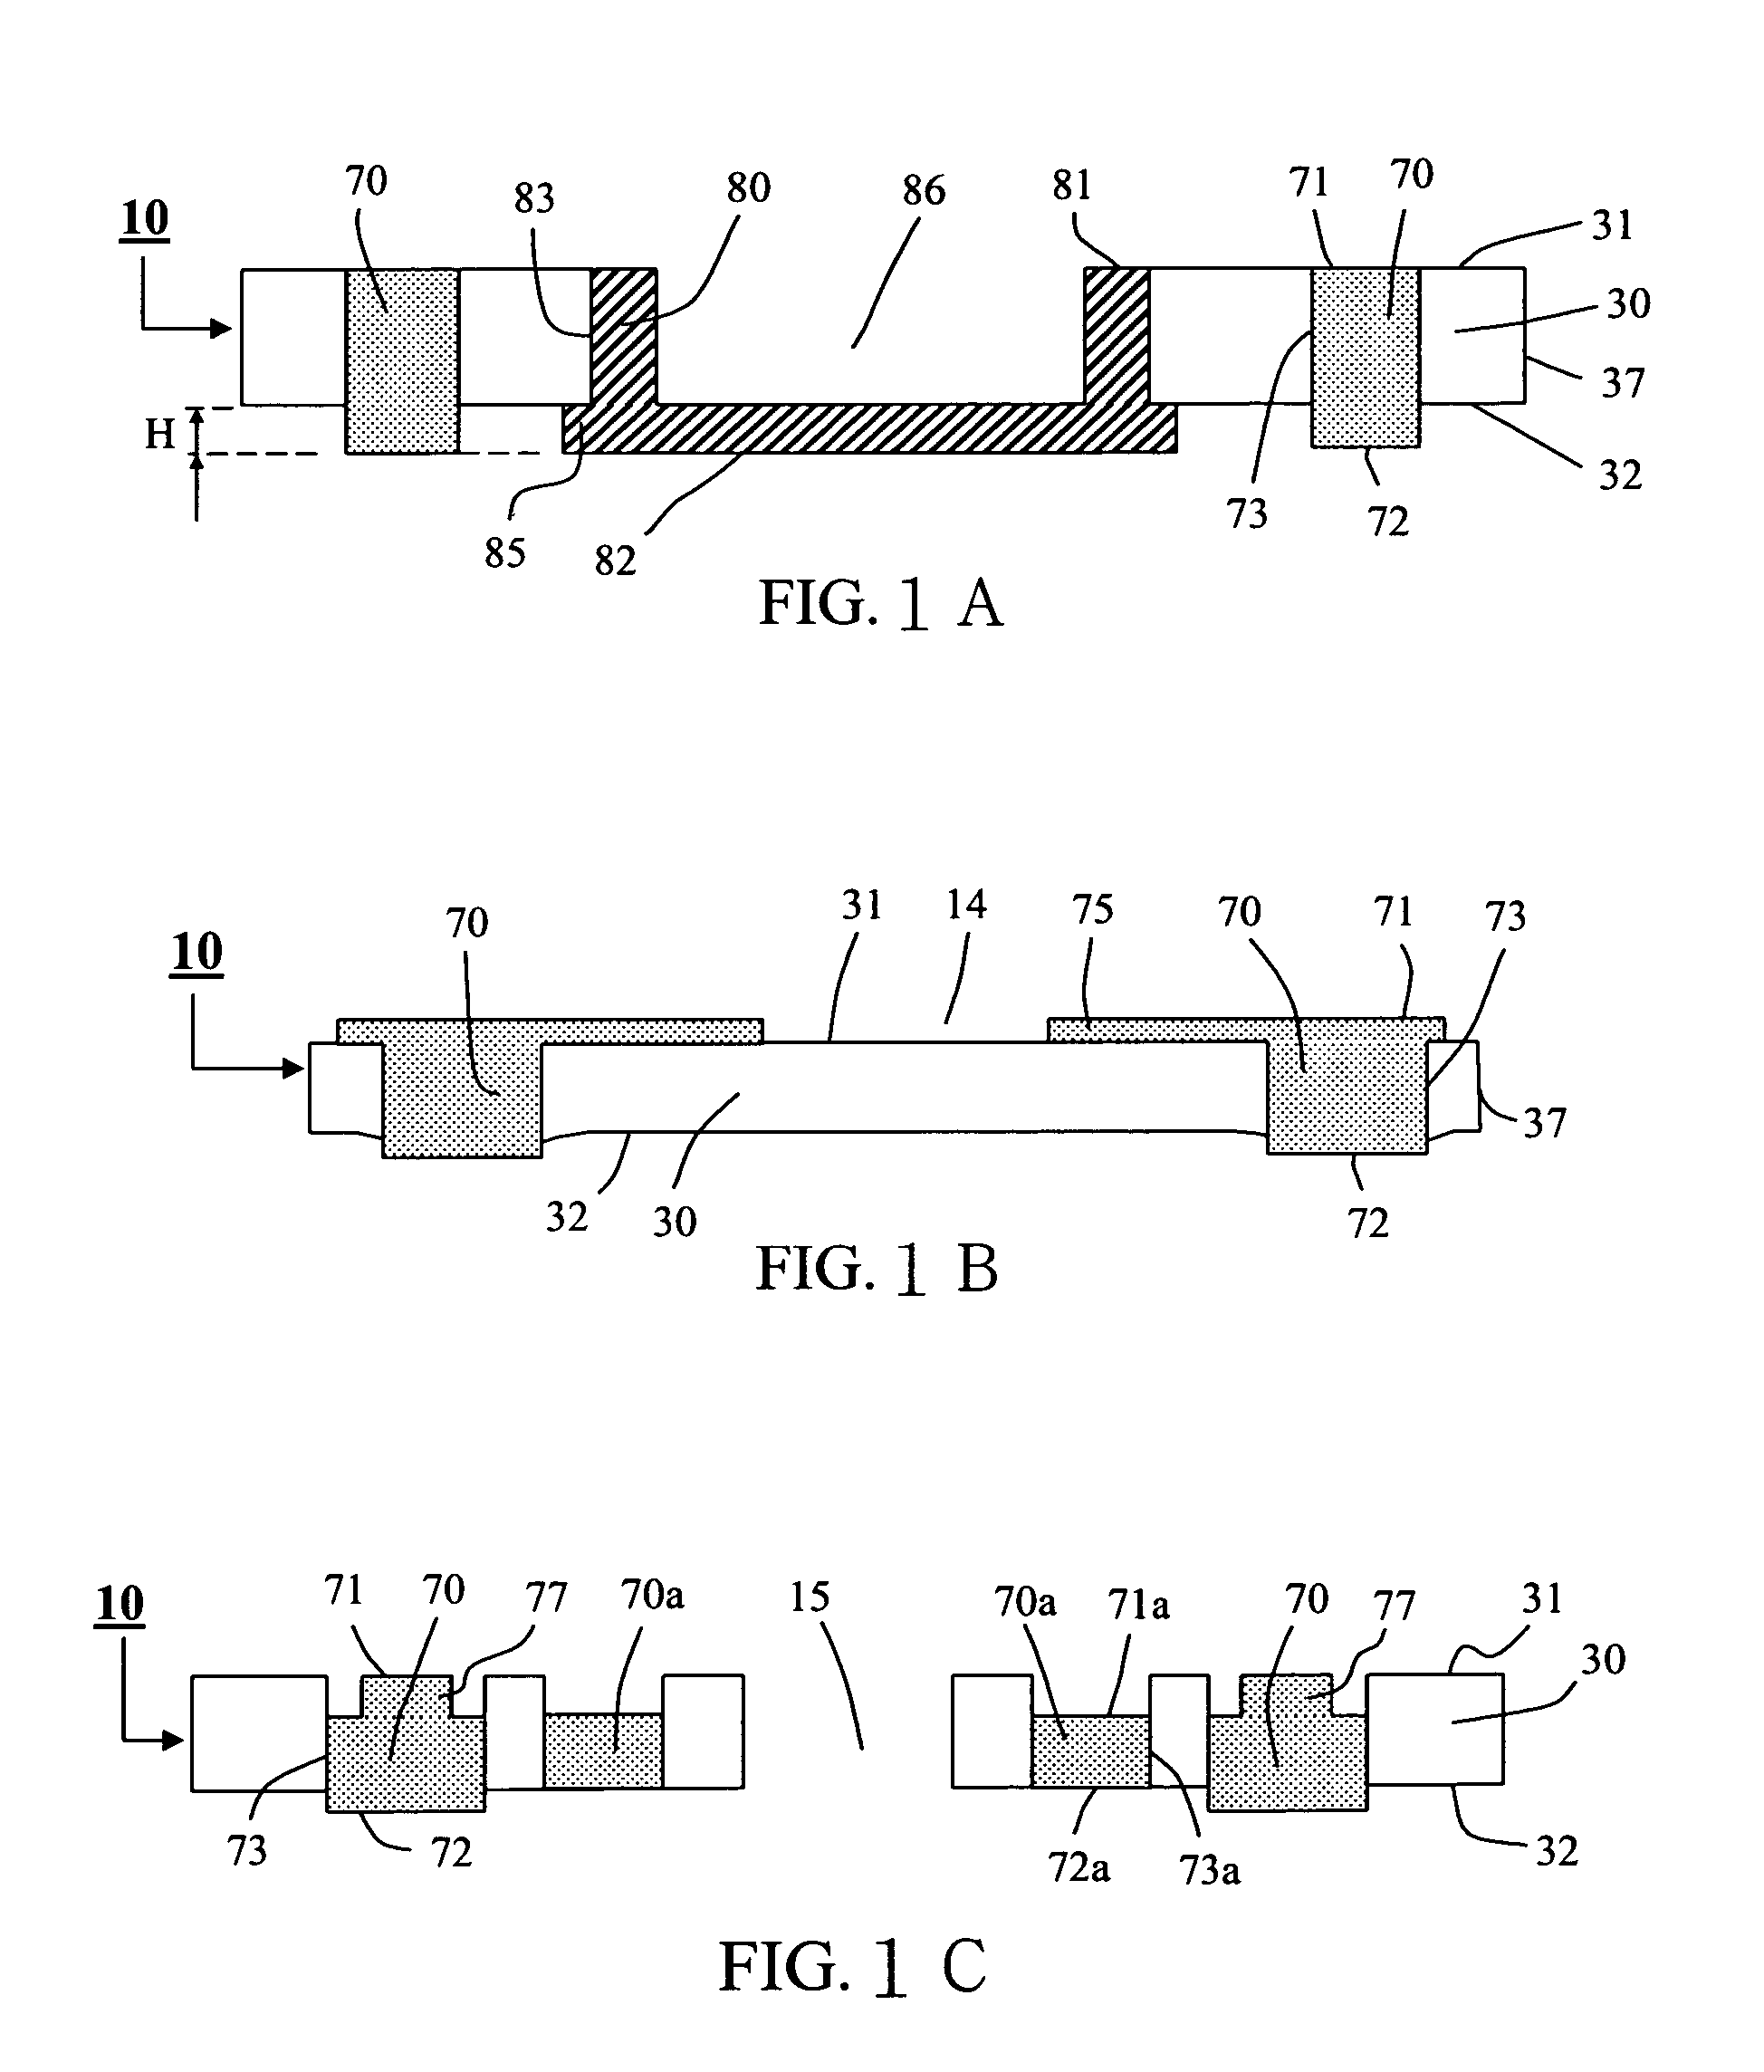 Substrate for electrical device and methods for making the same